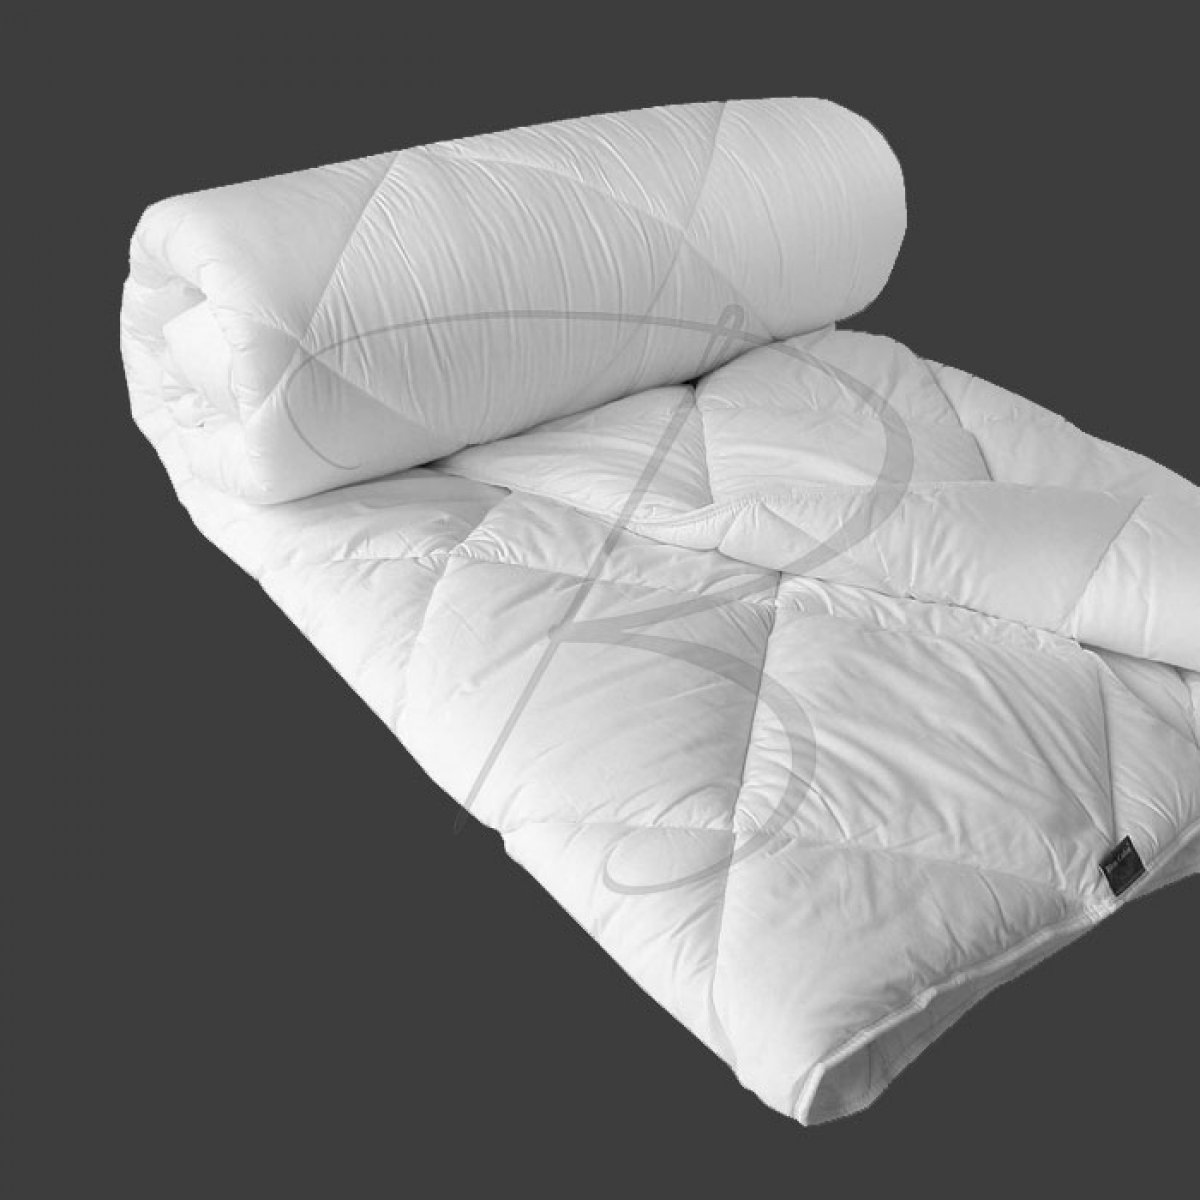 Pyrenees synthetic comforter - 350g/m² - 180 x 220